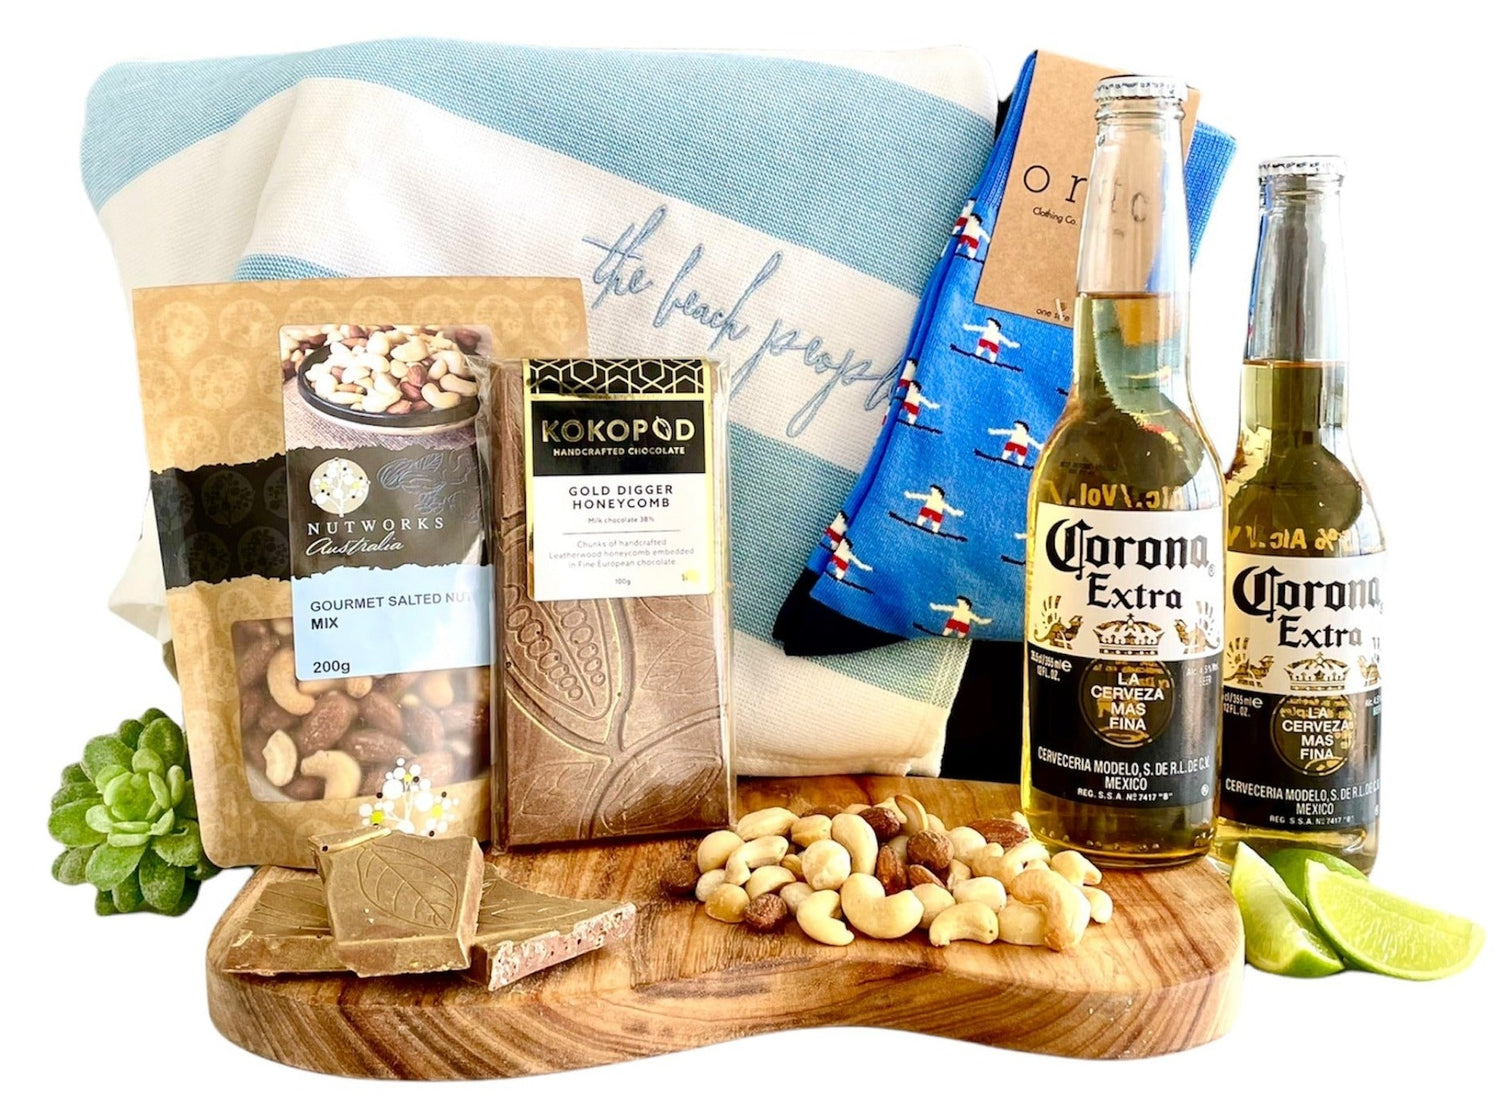 Best Hampers for men, boyfriend, dad, uncle or brother with The Beach People Sand Free Towel and Surfer Socks. Celebration gift for him to enjoy the Beach, Coronas Beer, Gourmet Nuts and Kokopod's favourite Honeycomb littered Chocolate. From the Beach to the office he'll love it.